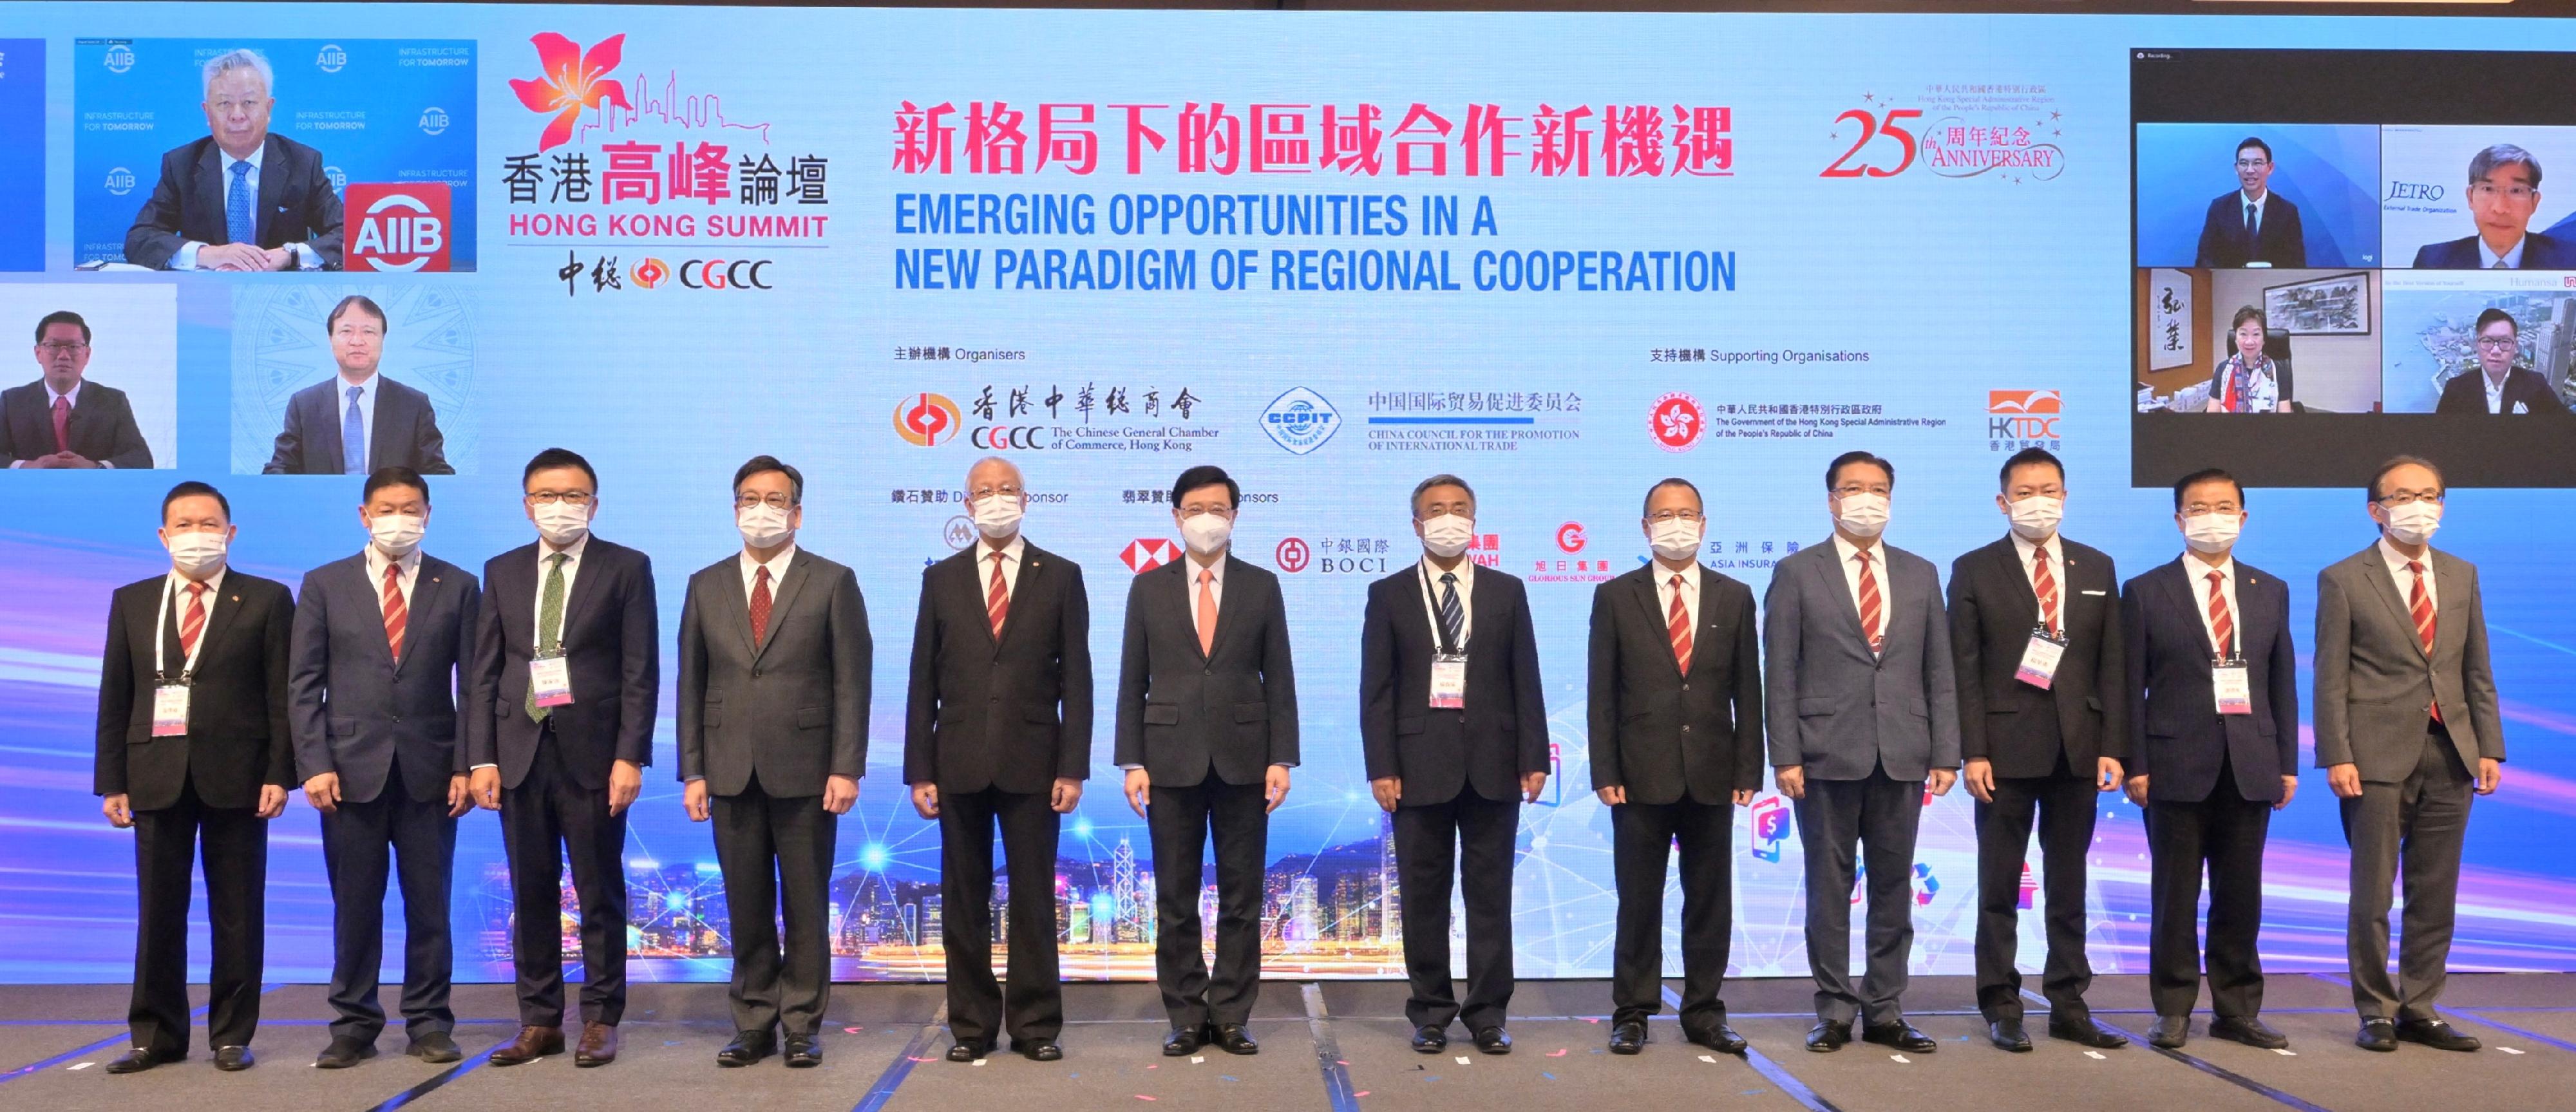 The Chief Executive, Mr John Lee, attended the Chinese General Chamber of Commerce Hong Kong Summit 2022 today (August 17). Photo shows (from fourth left) the Secretary for Commerce and Economic Development, Mr Algernon Yau; the Chairman of the Chinese General Chamber of Commerce, Hong Kong, Mr Yuen Mo; Mr Lee; the Acting Commissioner of the Office of the Commissioner of the Ministry of Foreign Affairs in the Hong Kong Special Administrative Region, Mr Yang Yirui; Permanent Honorary President of the Chinese General Chamber of Commerce, Hong Kong Dr Jonathan Choi; and other guests at the opening ceremony.